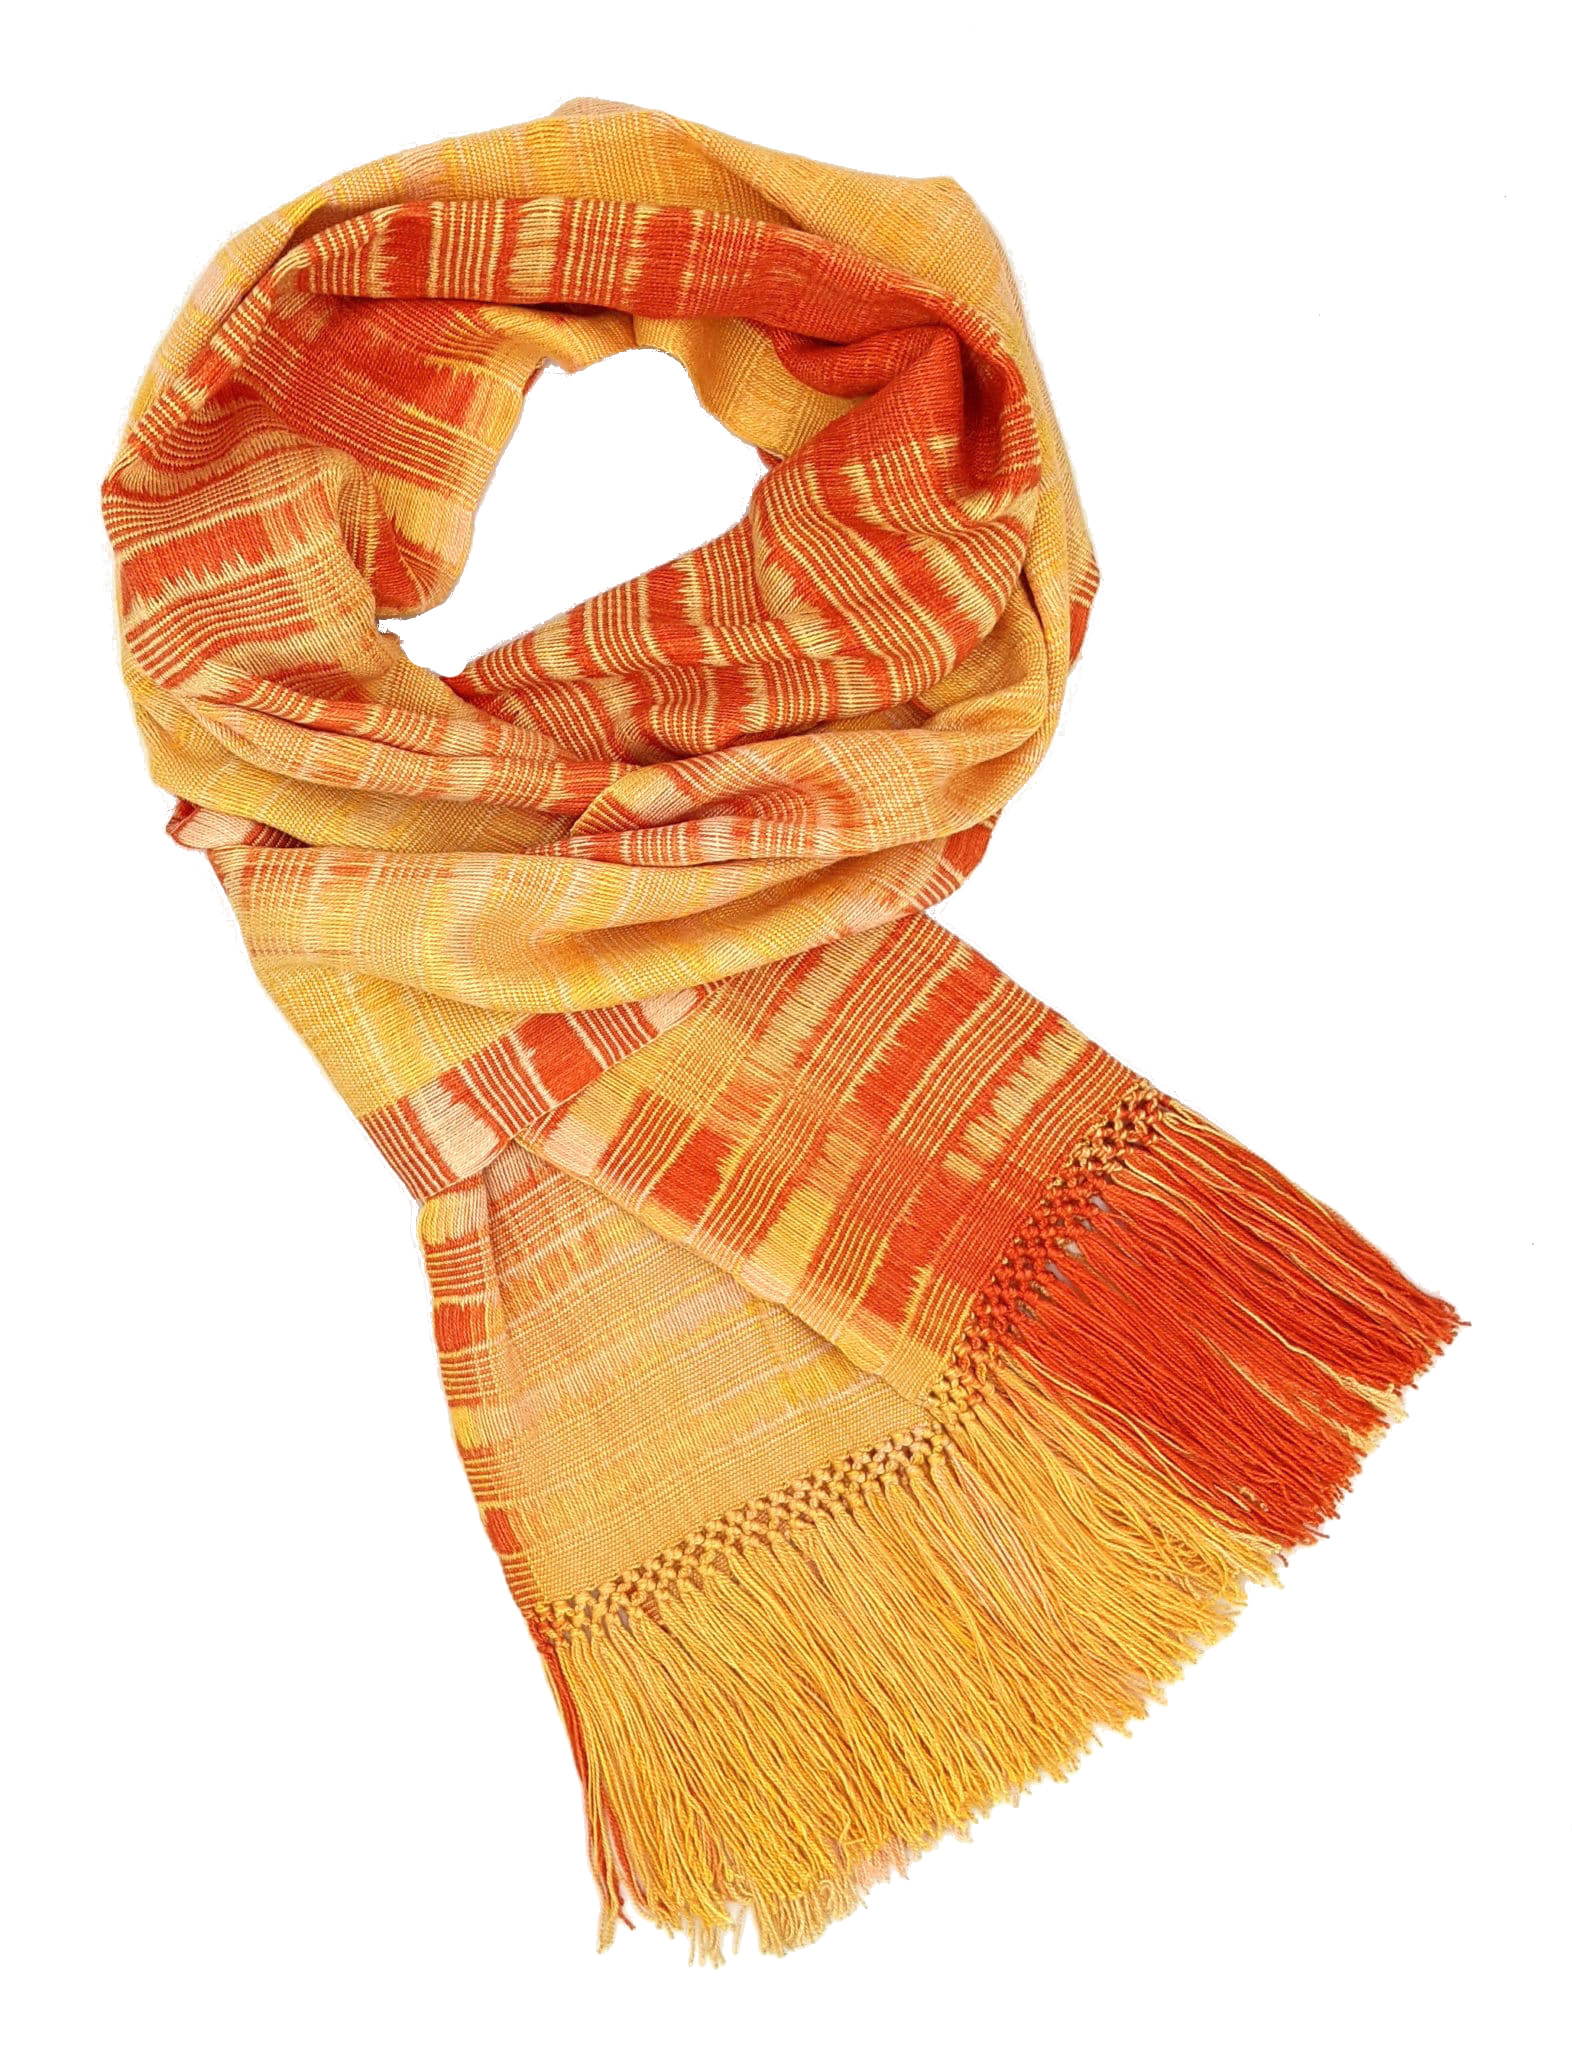 Orange, Peach and Yellow Lightweight Bamboo Open-Weave Handwoven Scarf, 8 x 68